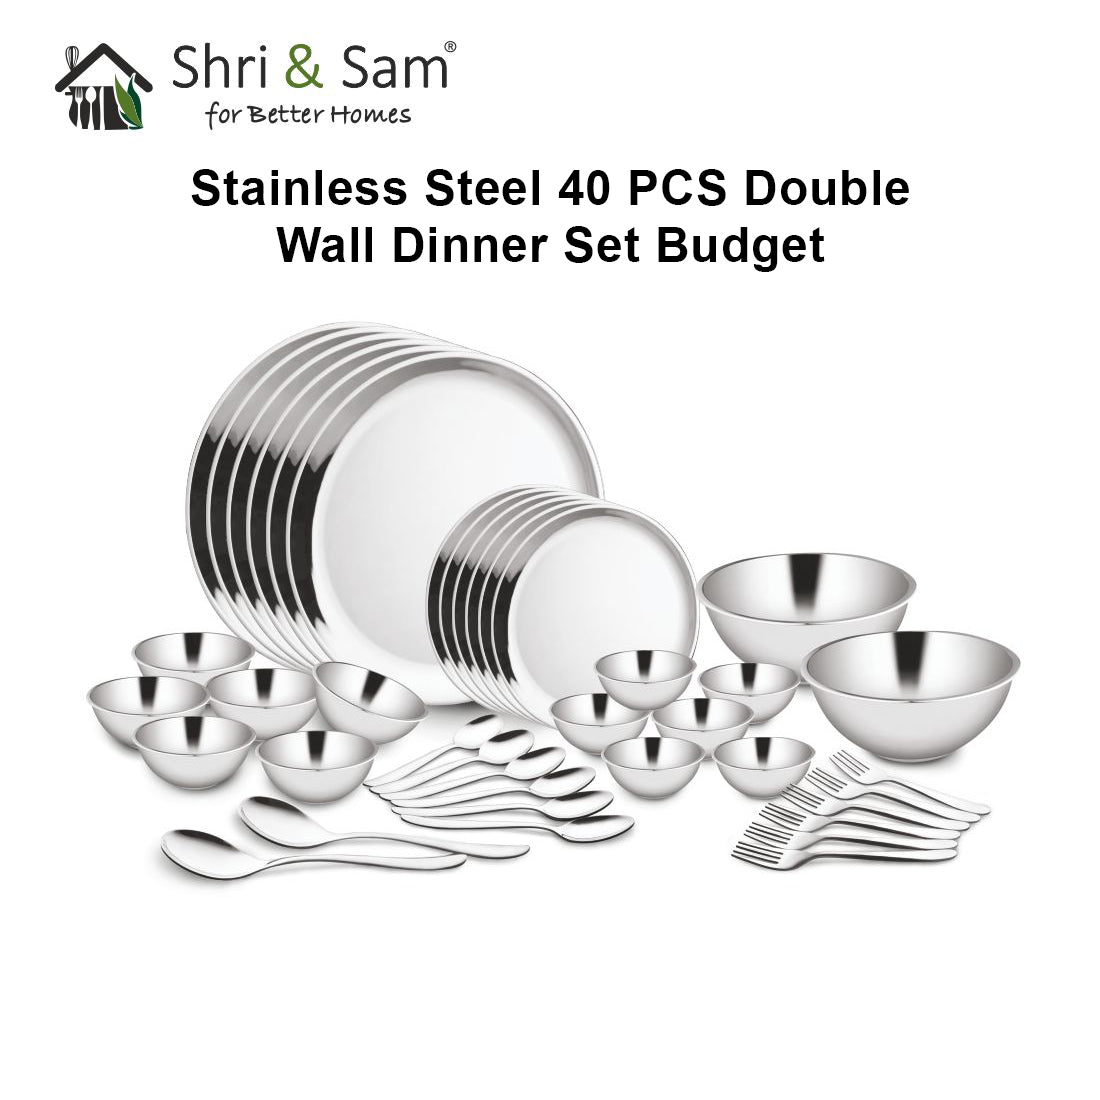 Stainless Steel 40 PCS Double Wall Dinner Set (6 People) Budget